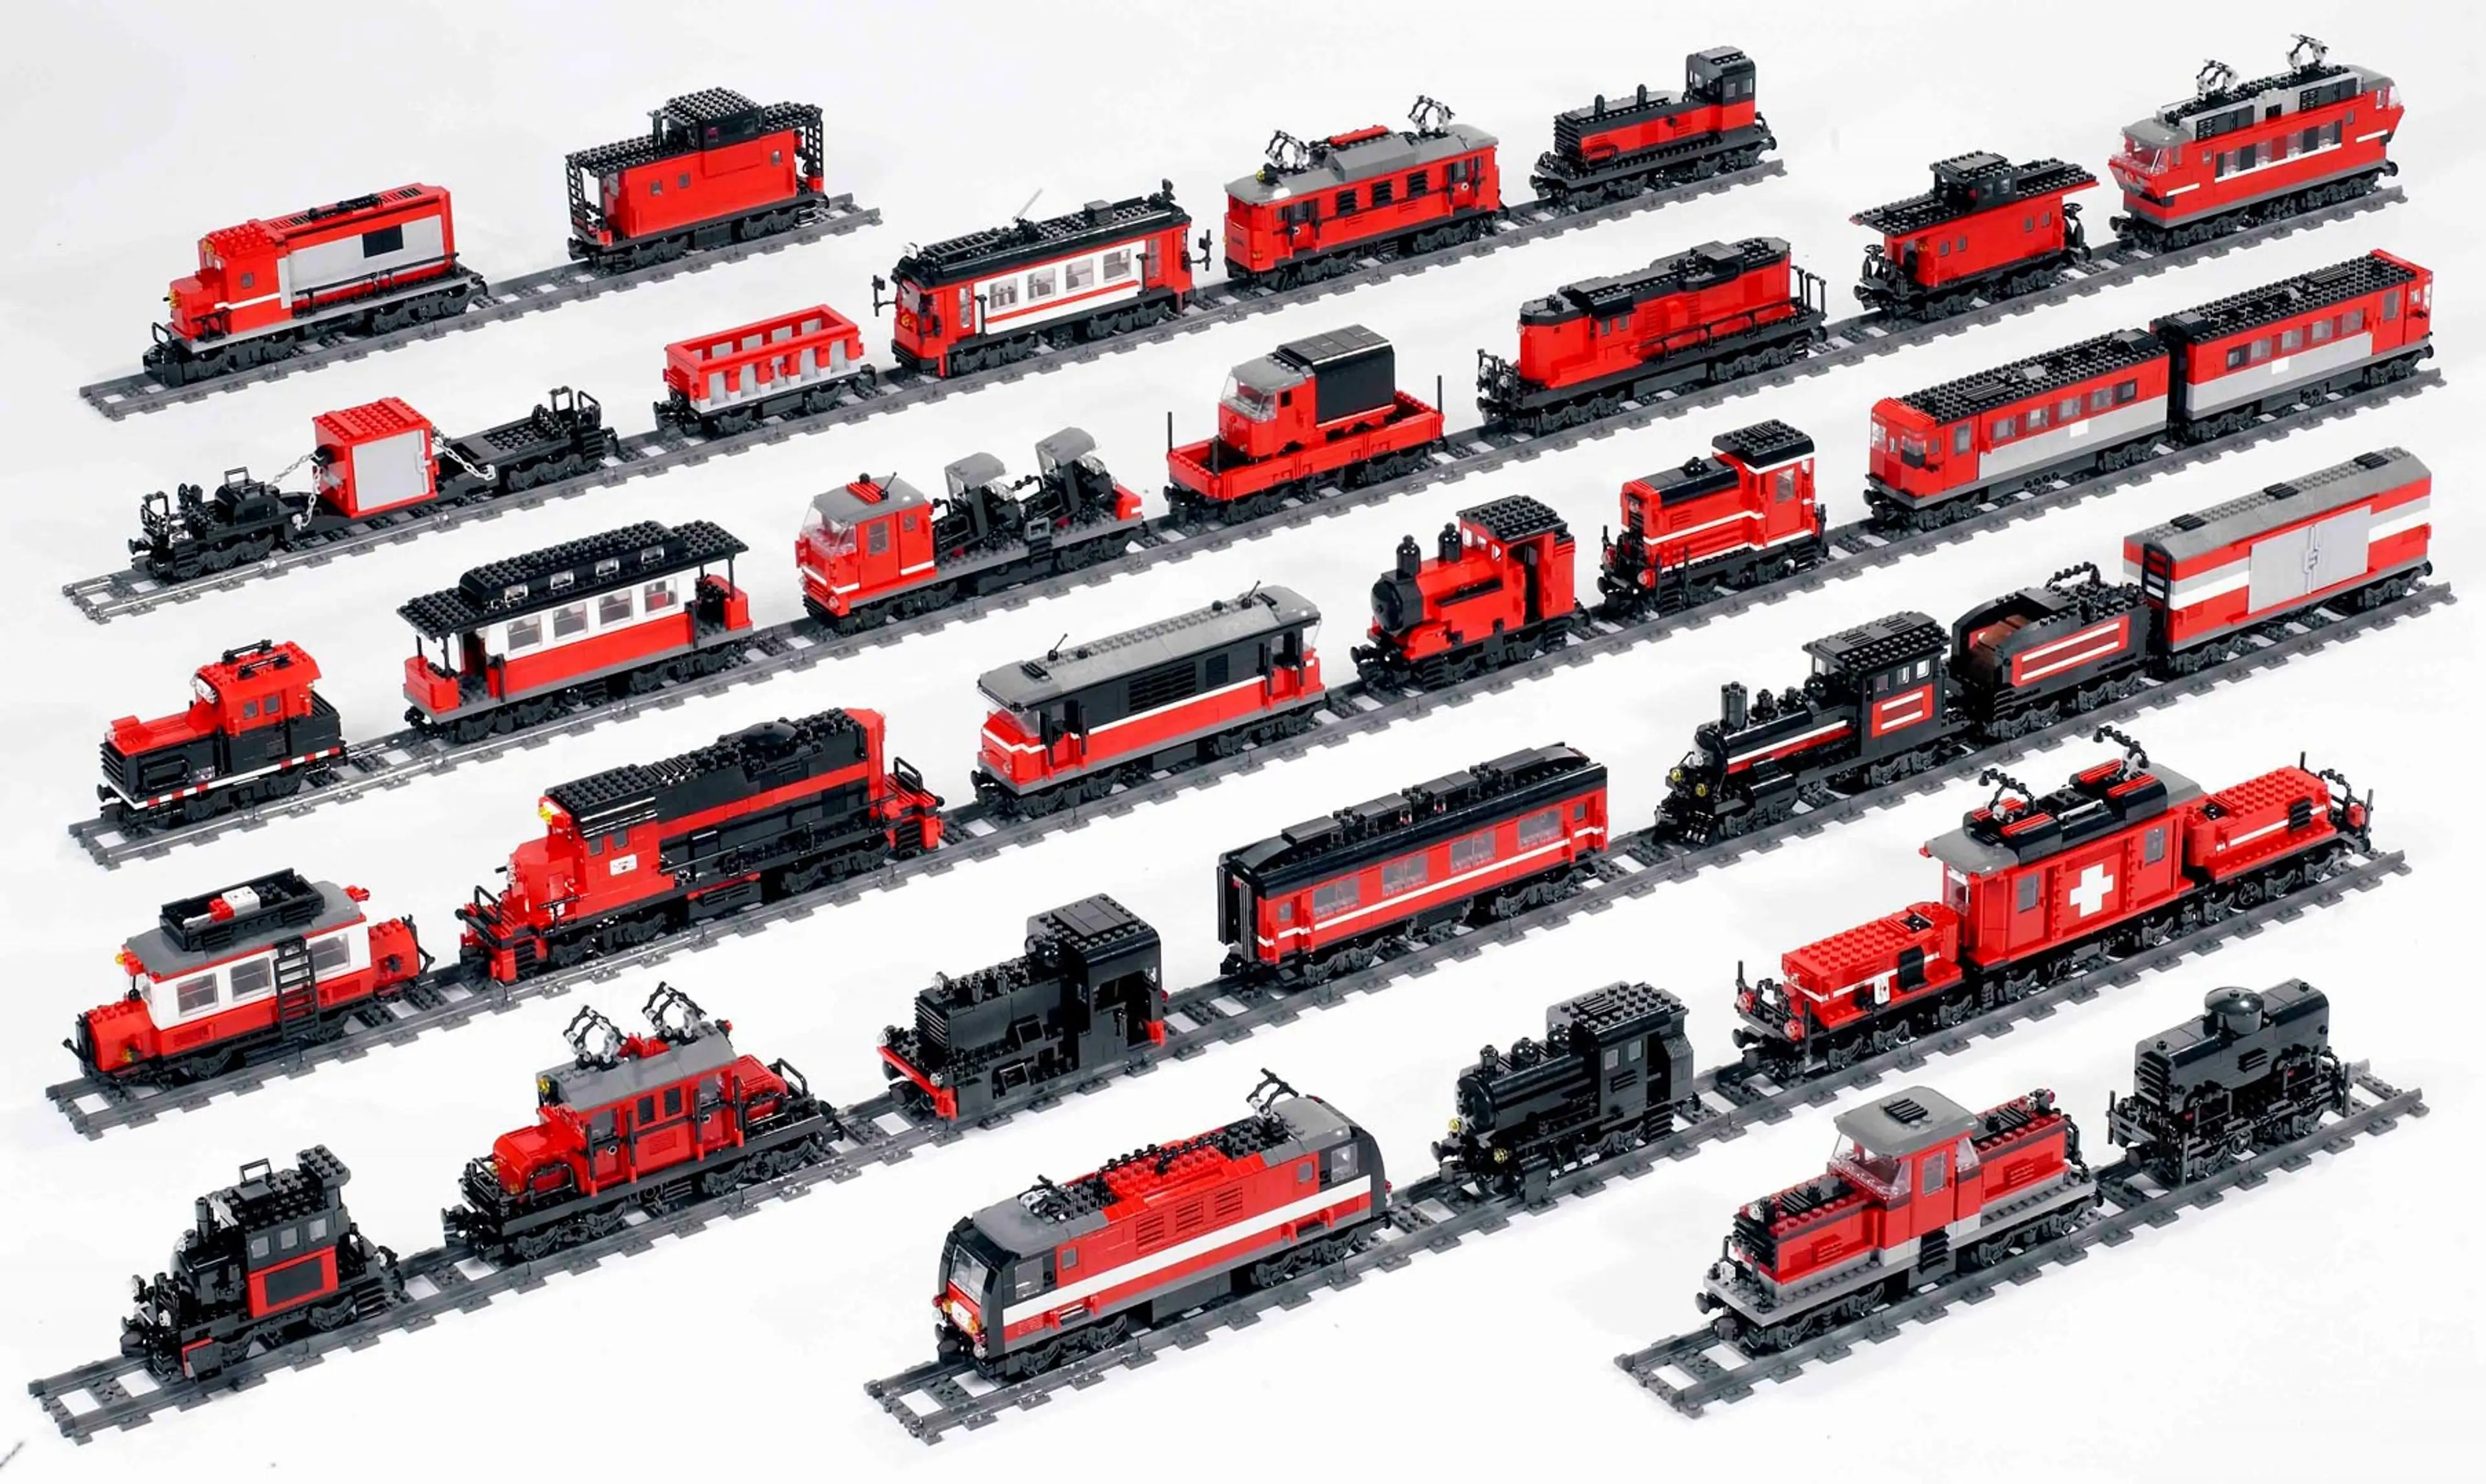 overview of all the alternate models from the Hobby Trains set